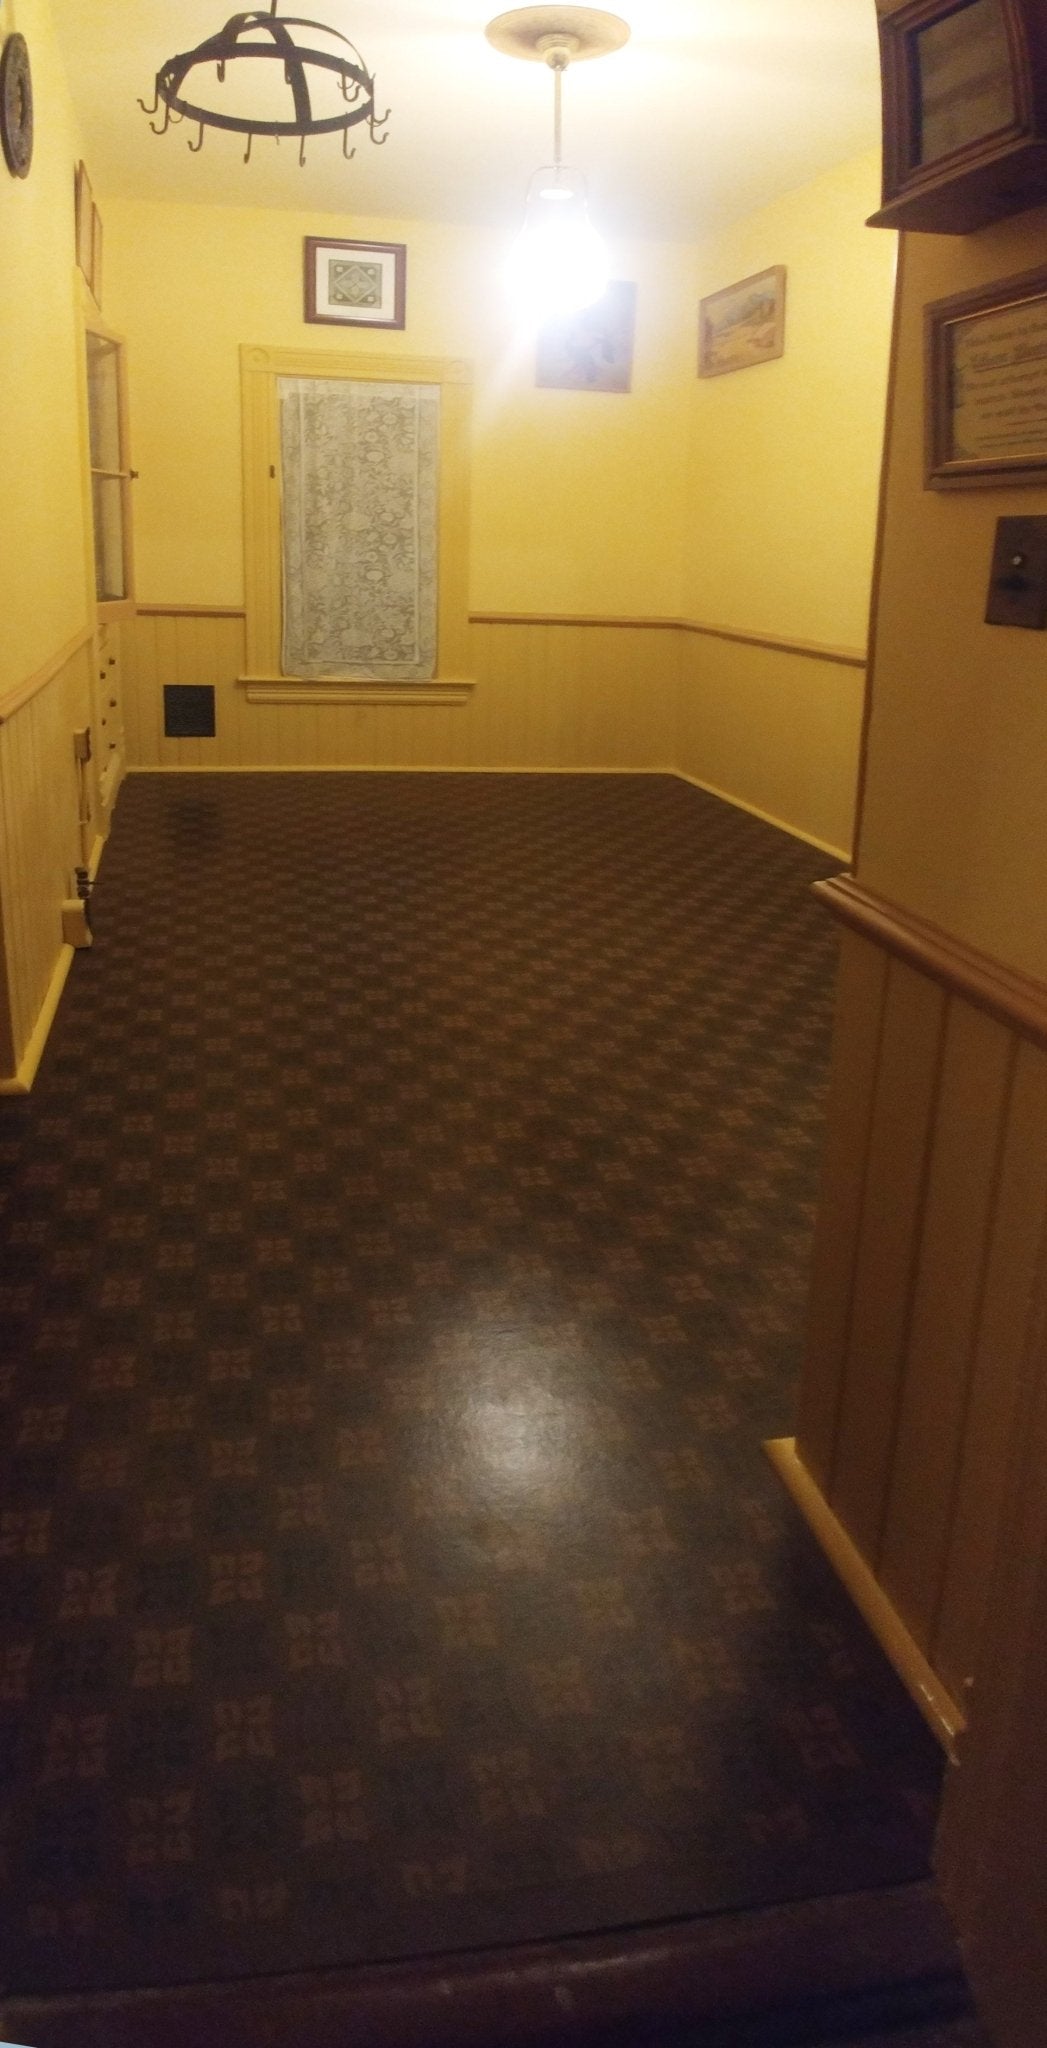 This is the fully installed wall-to-wall floorcloth, a reproduction of an original linoleum pattern, c.1910 or so. 